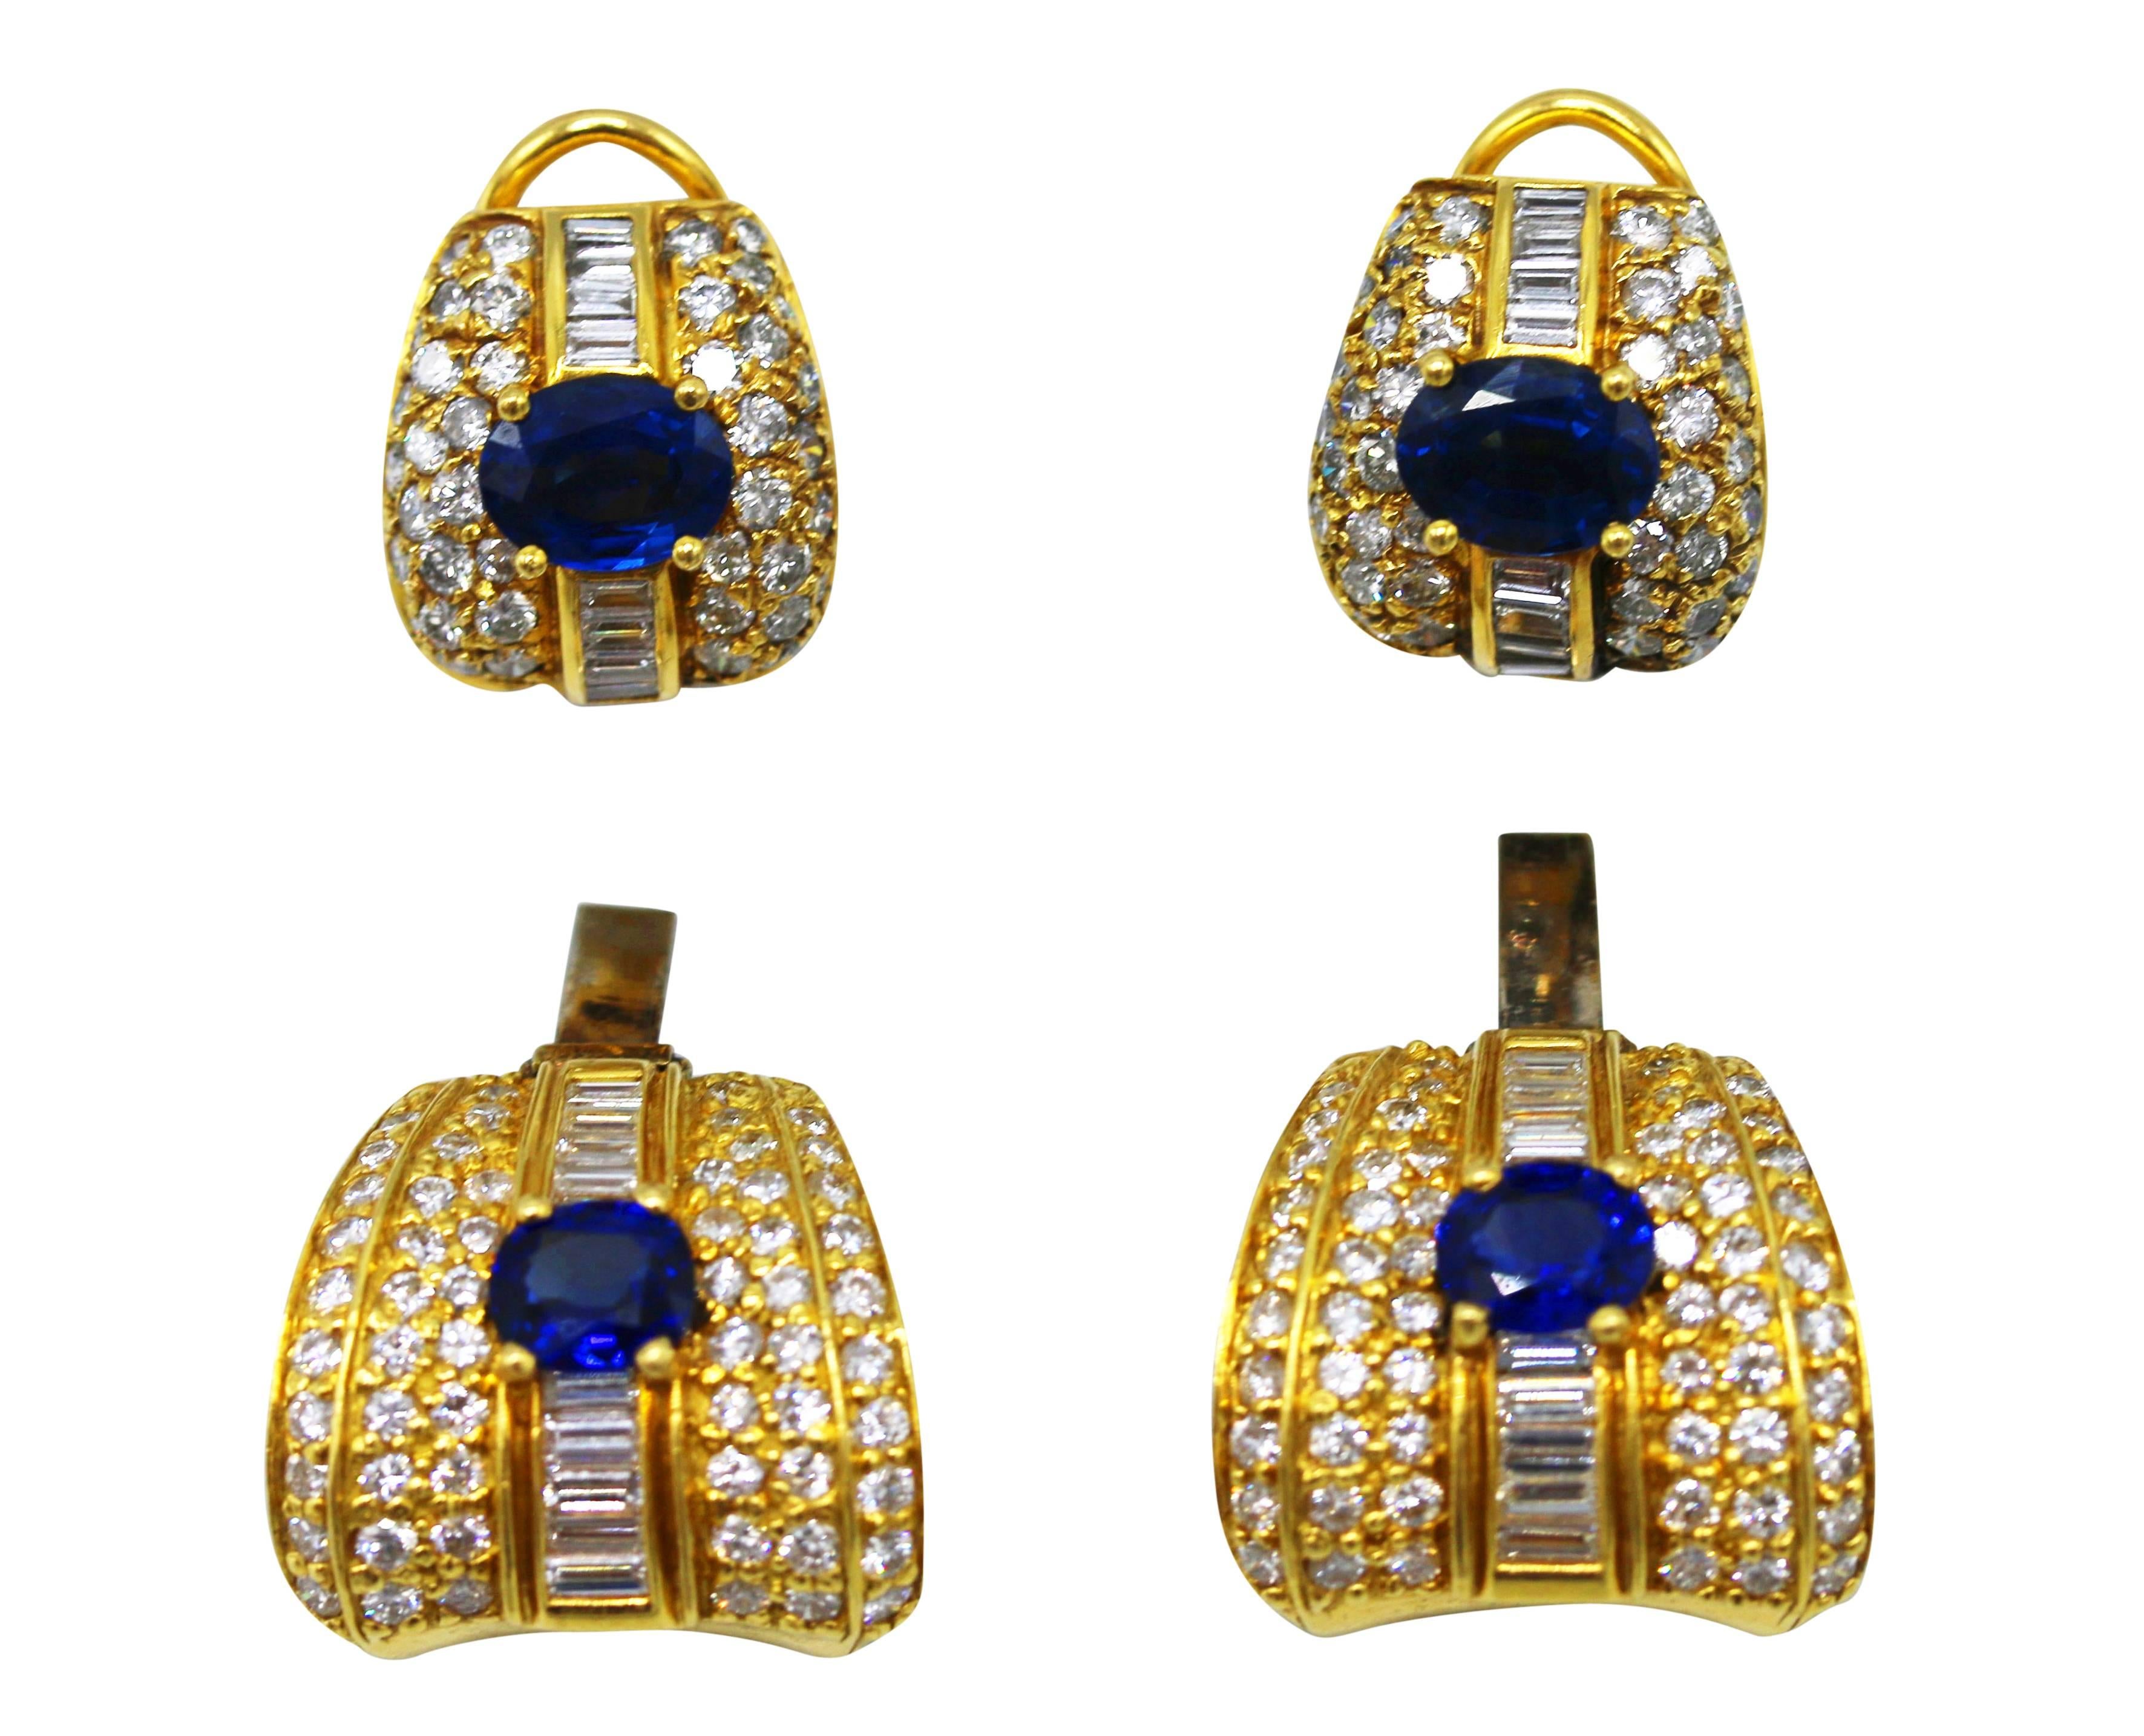 Pair of 18 karat yellow gold, sapphire and diamond earclips, the tops and pendants of tapered rectangular design set with 4 oval sapphires weighing approximately 4.90 carats, accented by baguette and round diamonds weighing approximately 5.10